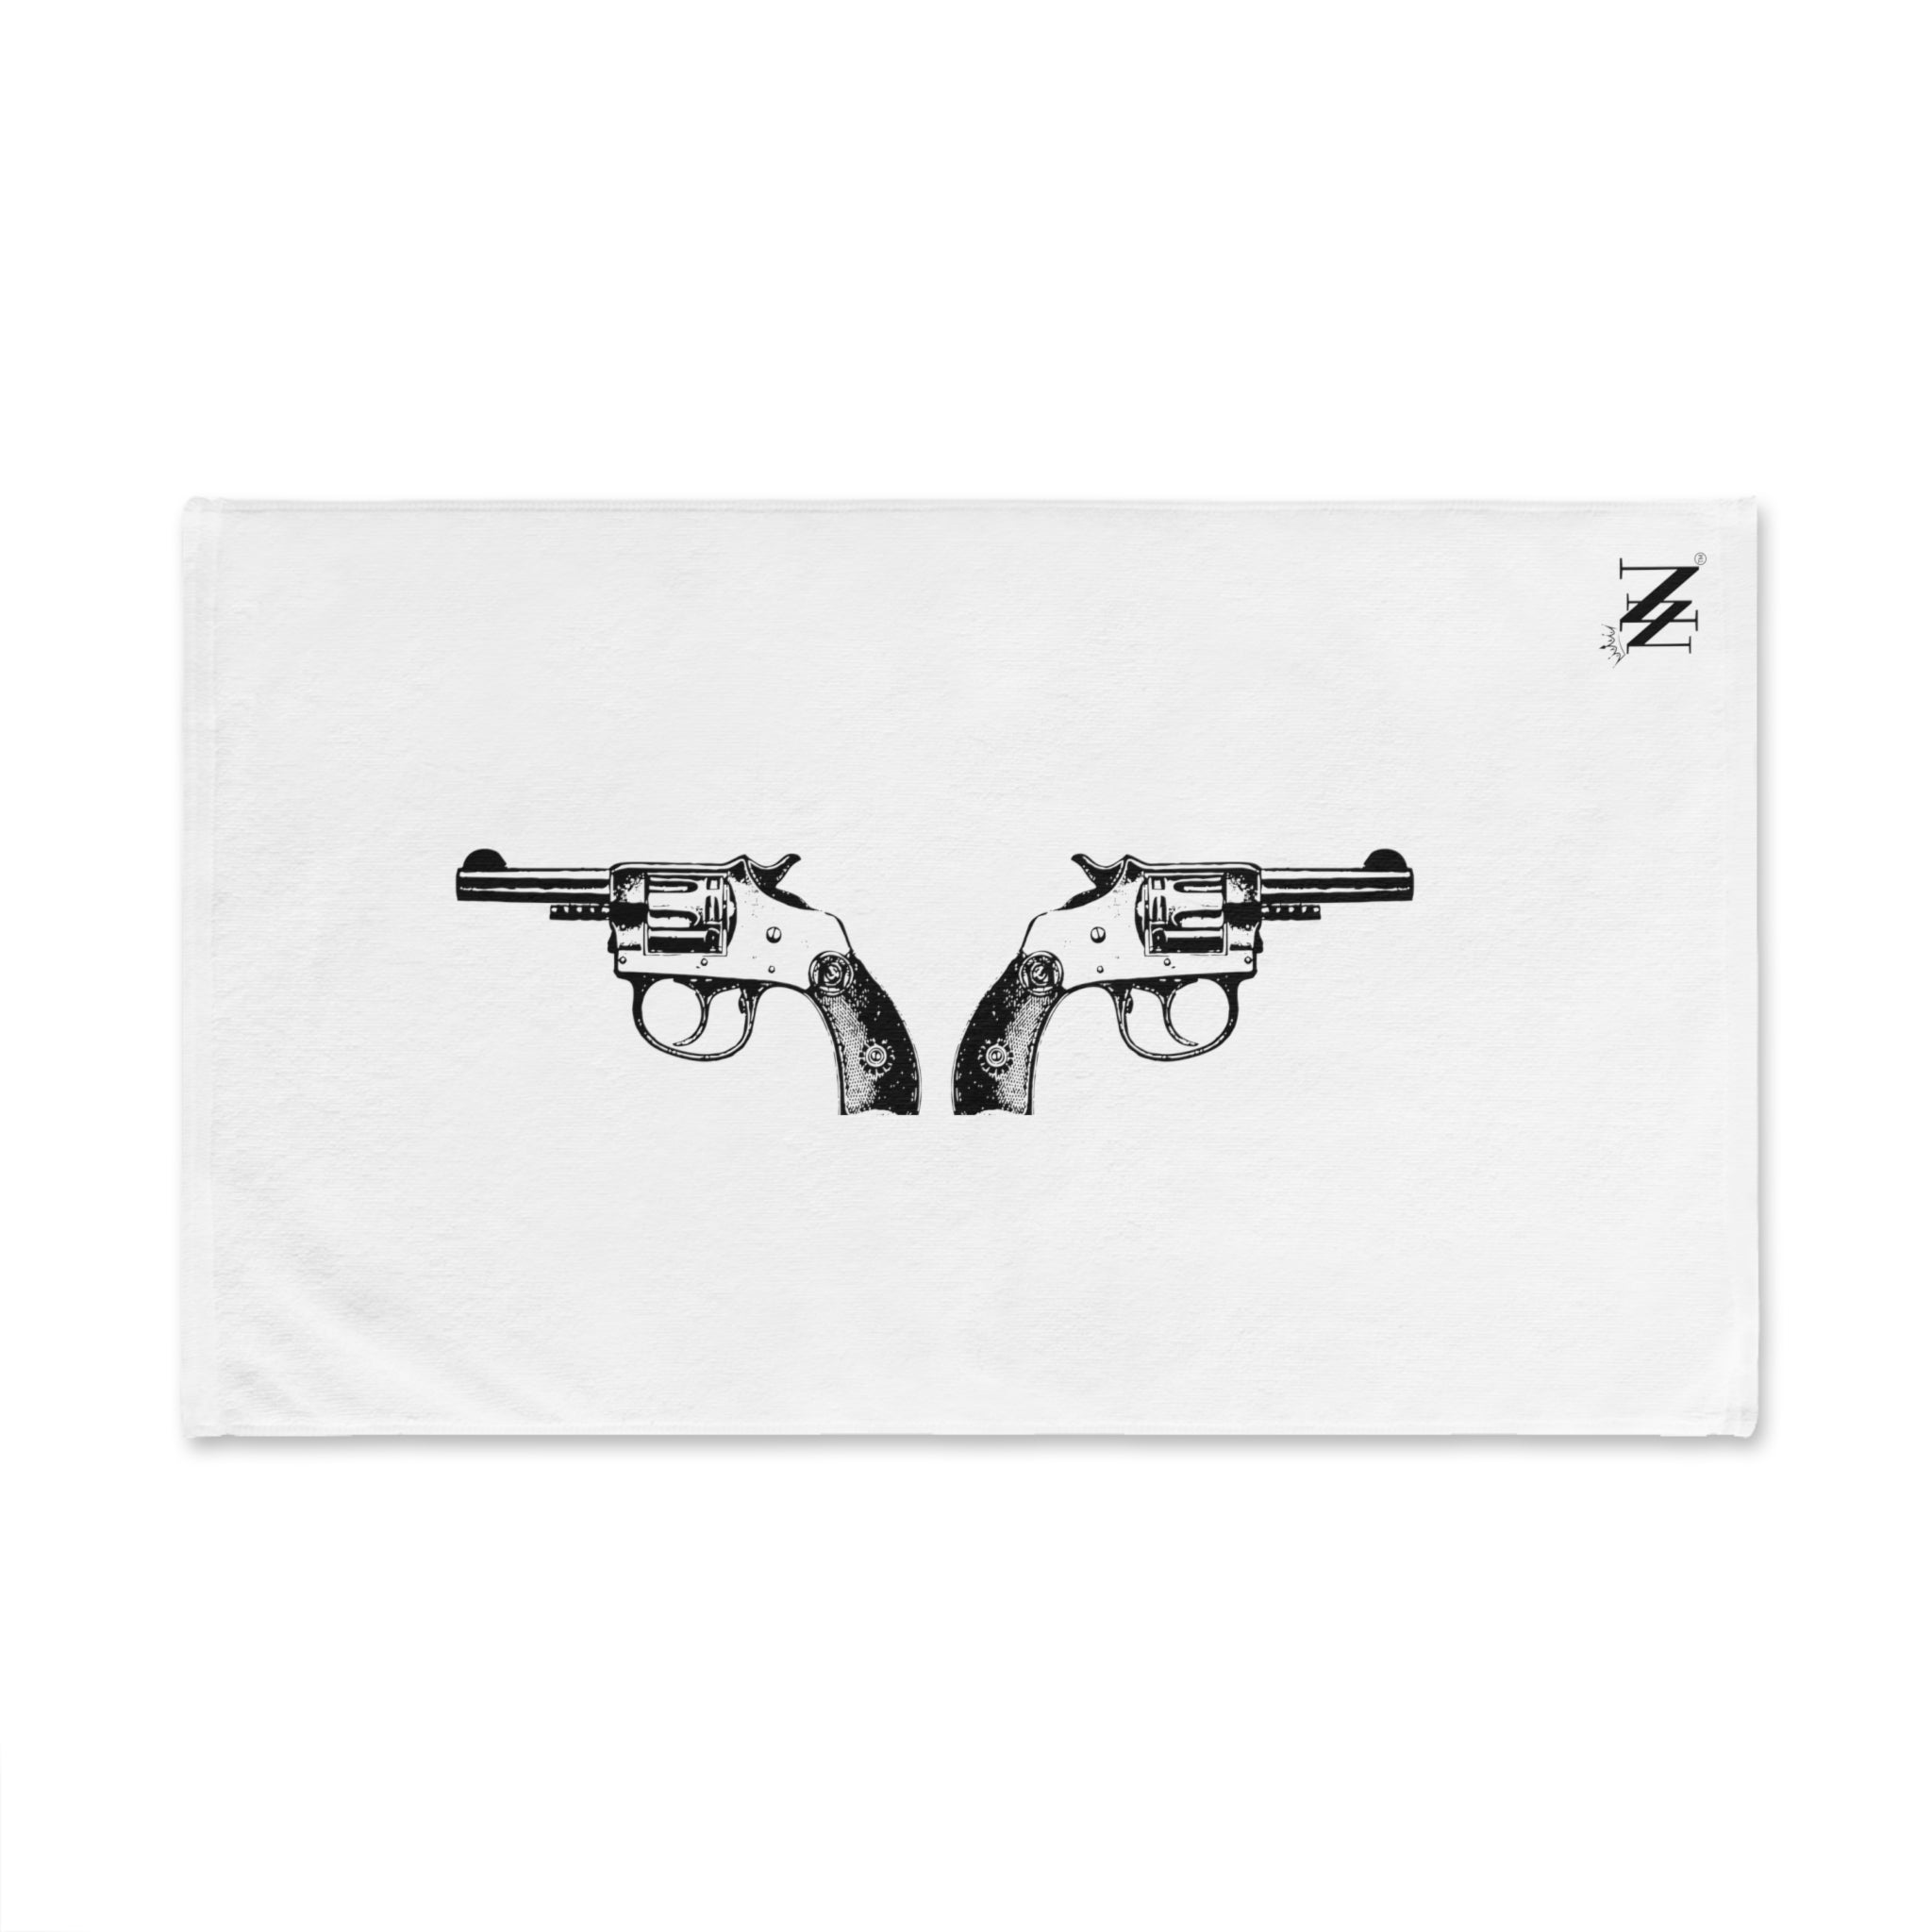 Black Revolver Gun Show White | Funny Gifts for Men - Gifts for Him - Birthday Gifts for Men, Him, Her, Husband, Boyfriend, Girlfriend, New Couple Gifts, Fathers & Valentines Day Gifts, Christmas Gifts NECTAR NAPKINS